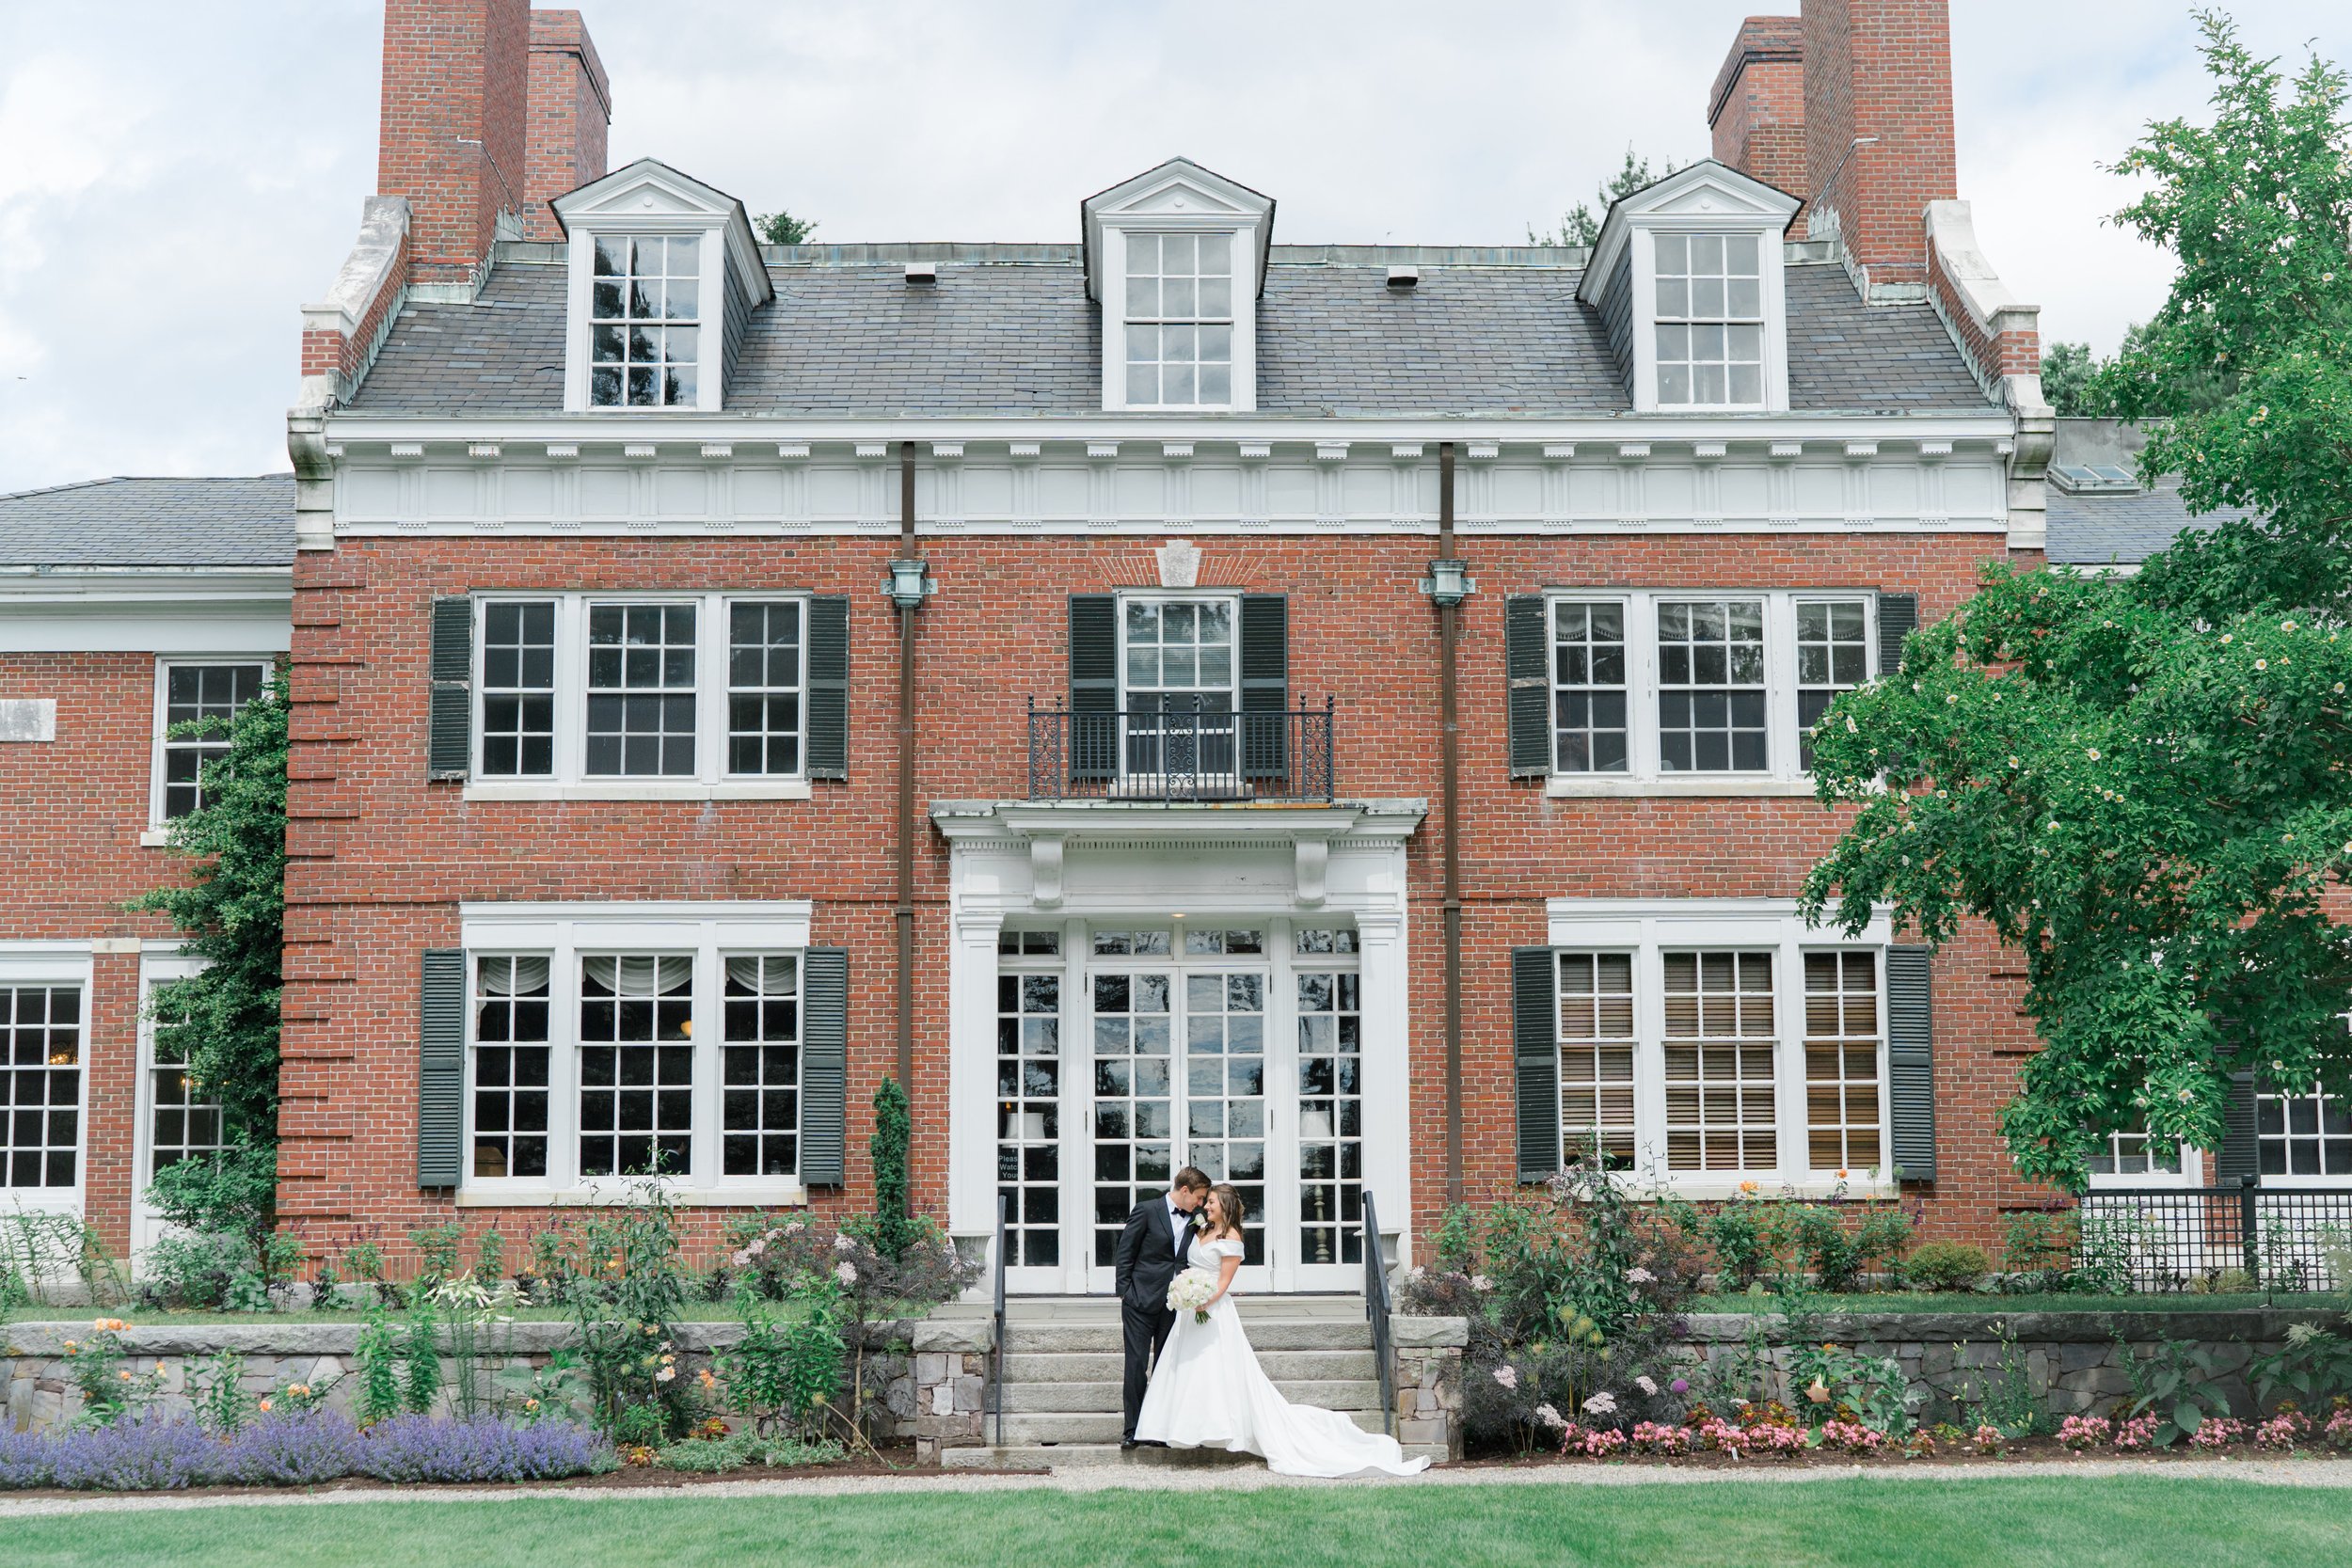 Bride and groom snuggle in front of the grand facade of the Bradley Estate. Boston Summer Wedding